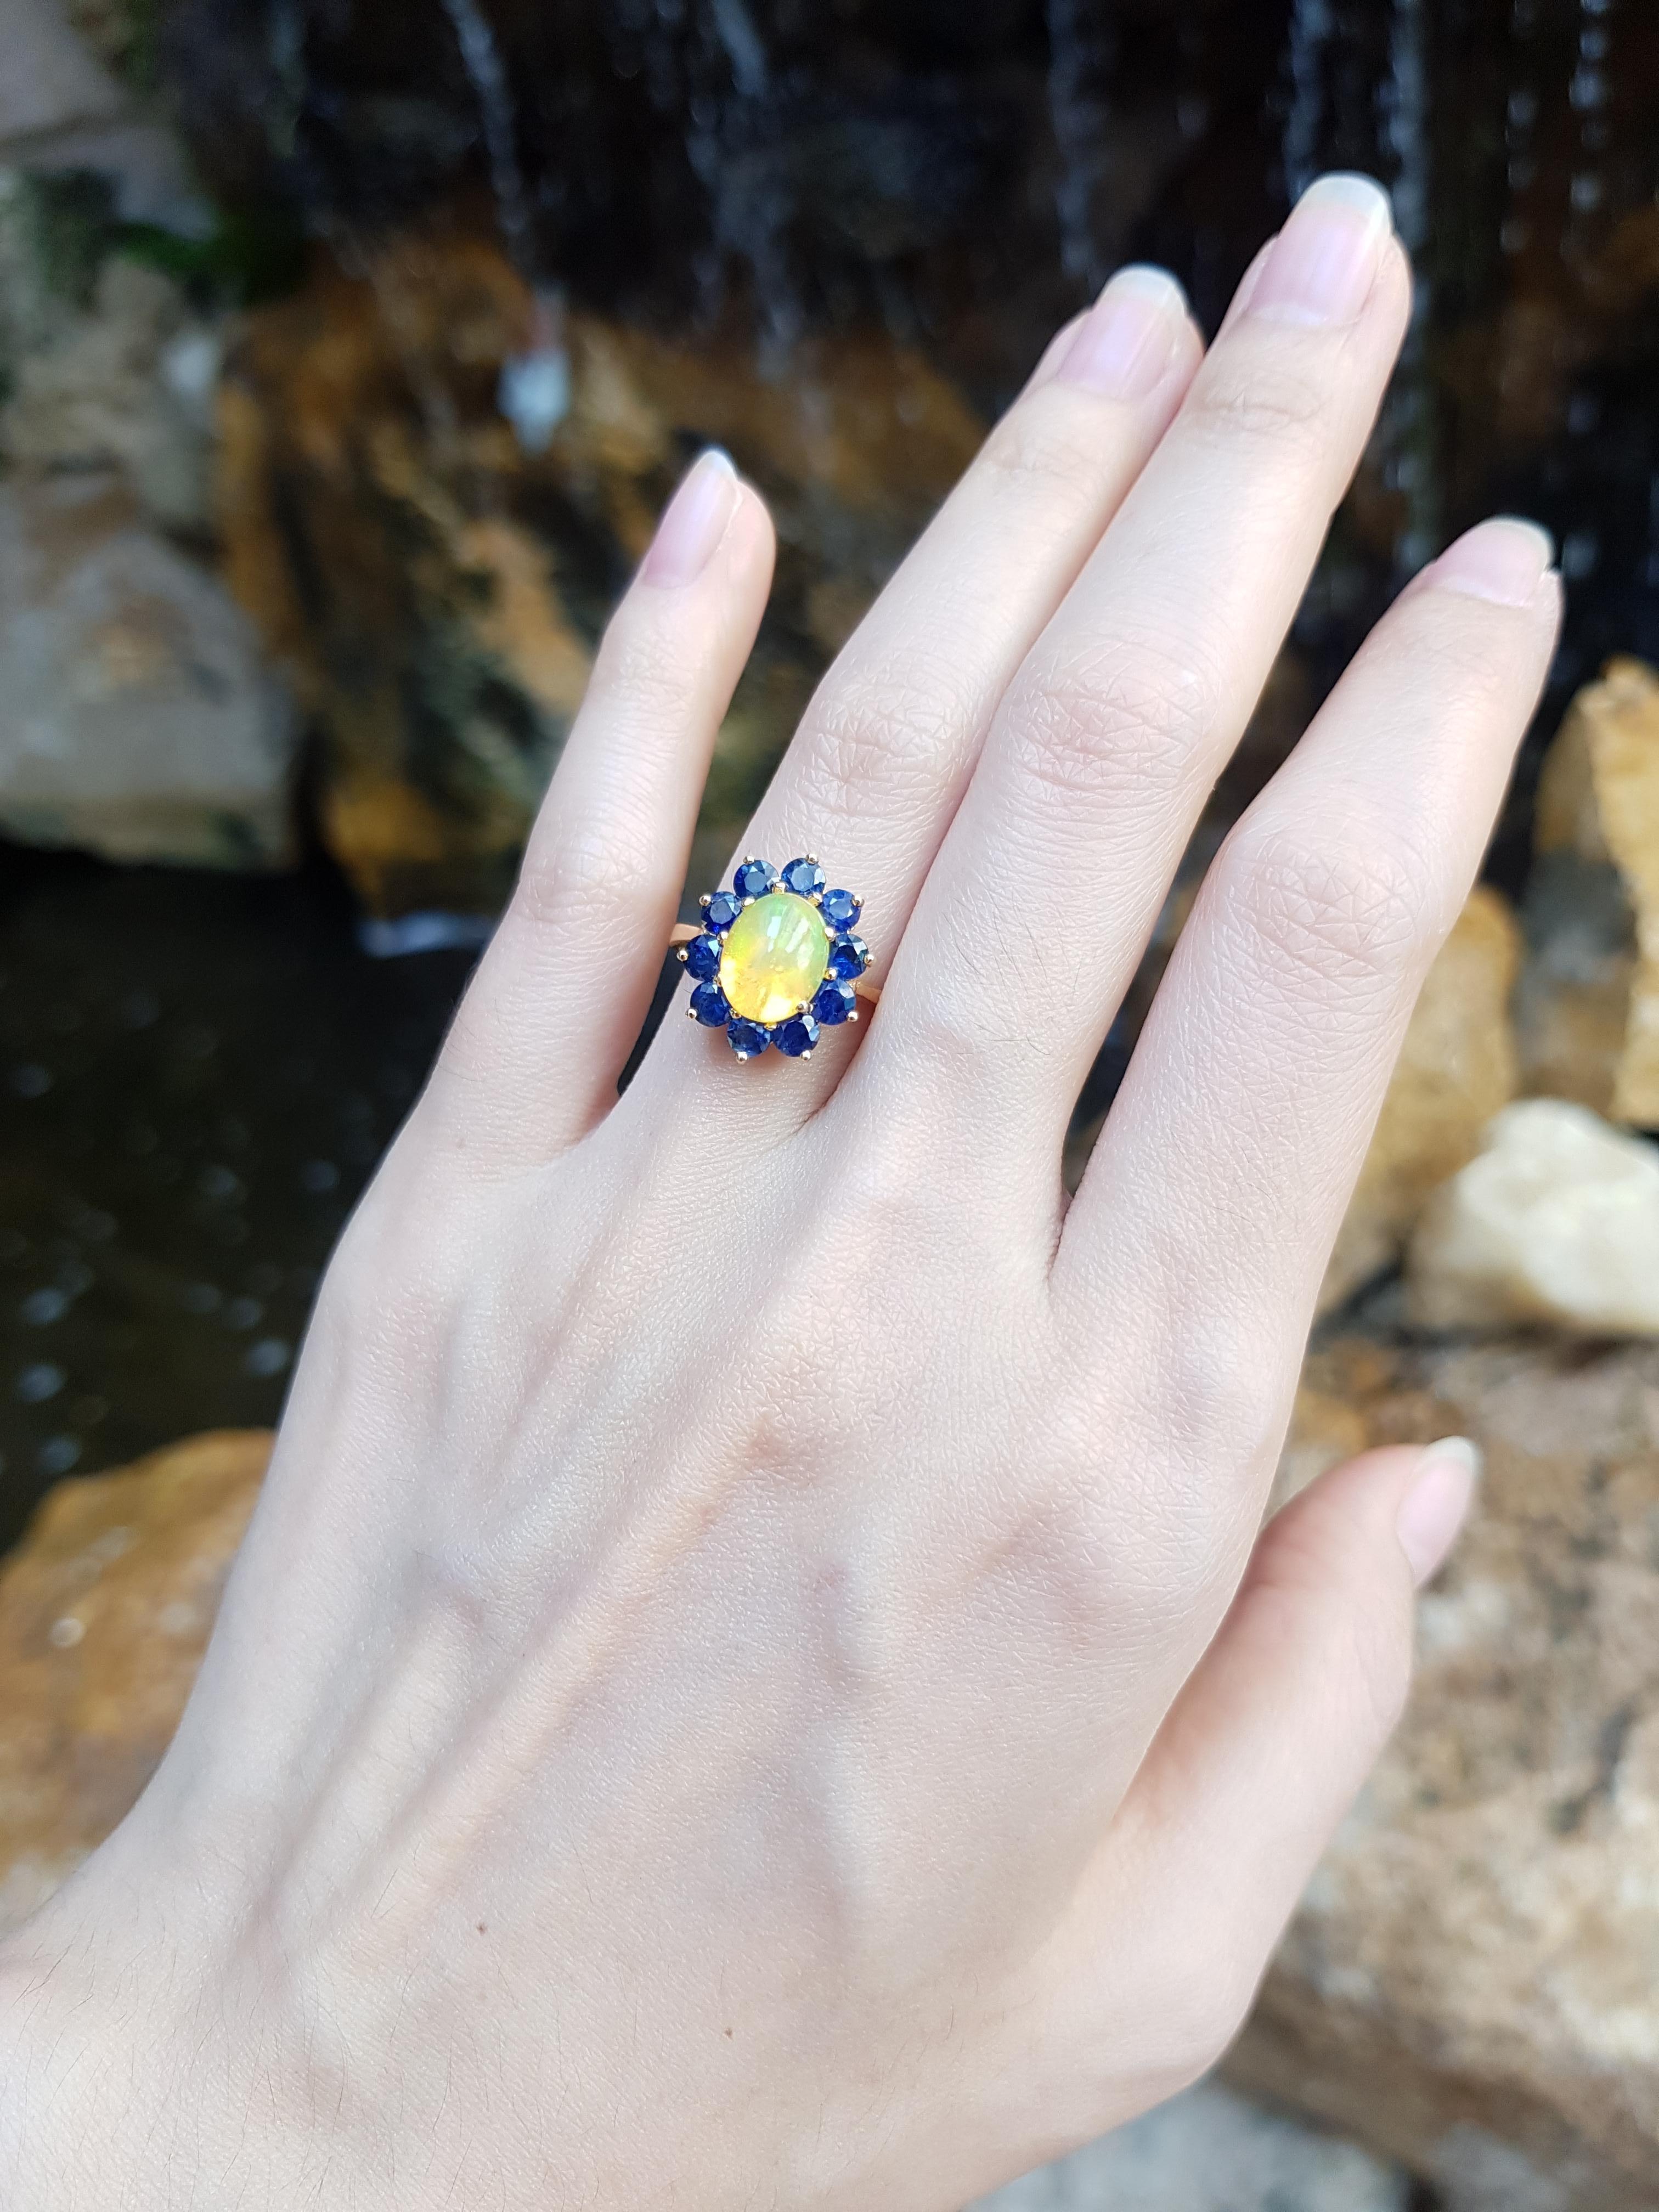 Opal 1.72 carats with Blue Sapphire 1.41 Carats Ring set in 18 Karat Gold Settings 

Width: 1.1 cm
Length: 1.5 cm 
Ring Size: 55

